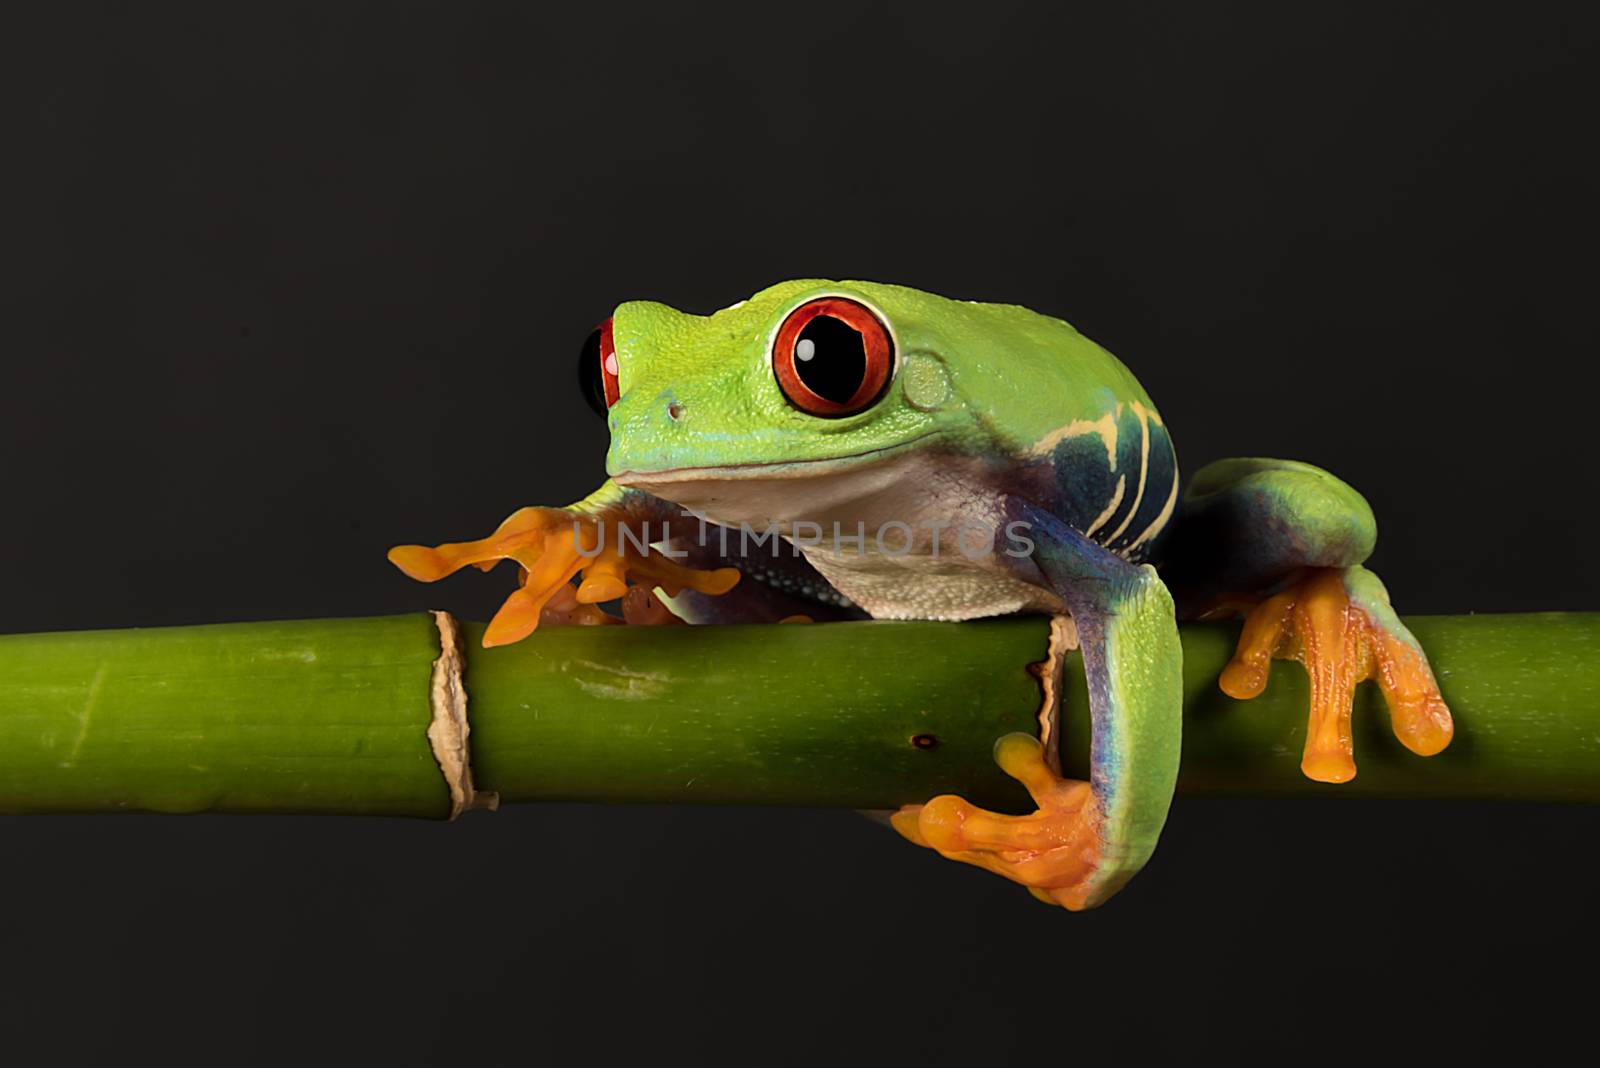 A close photograph of a red eyed tree frog balancing on a bamboo shoot against a black background